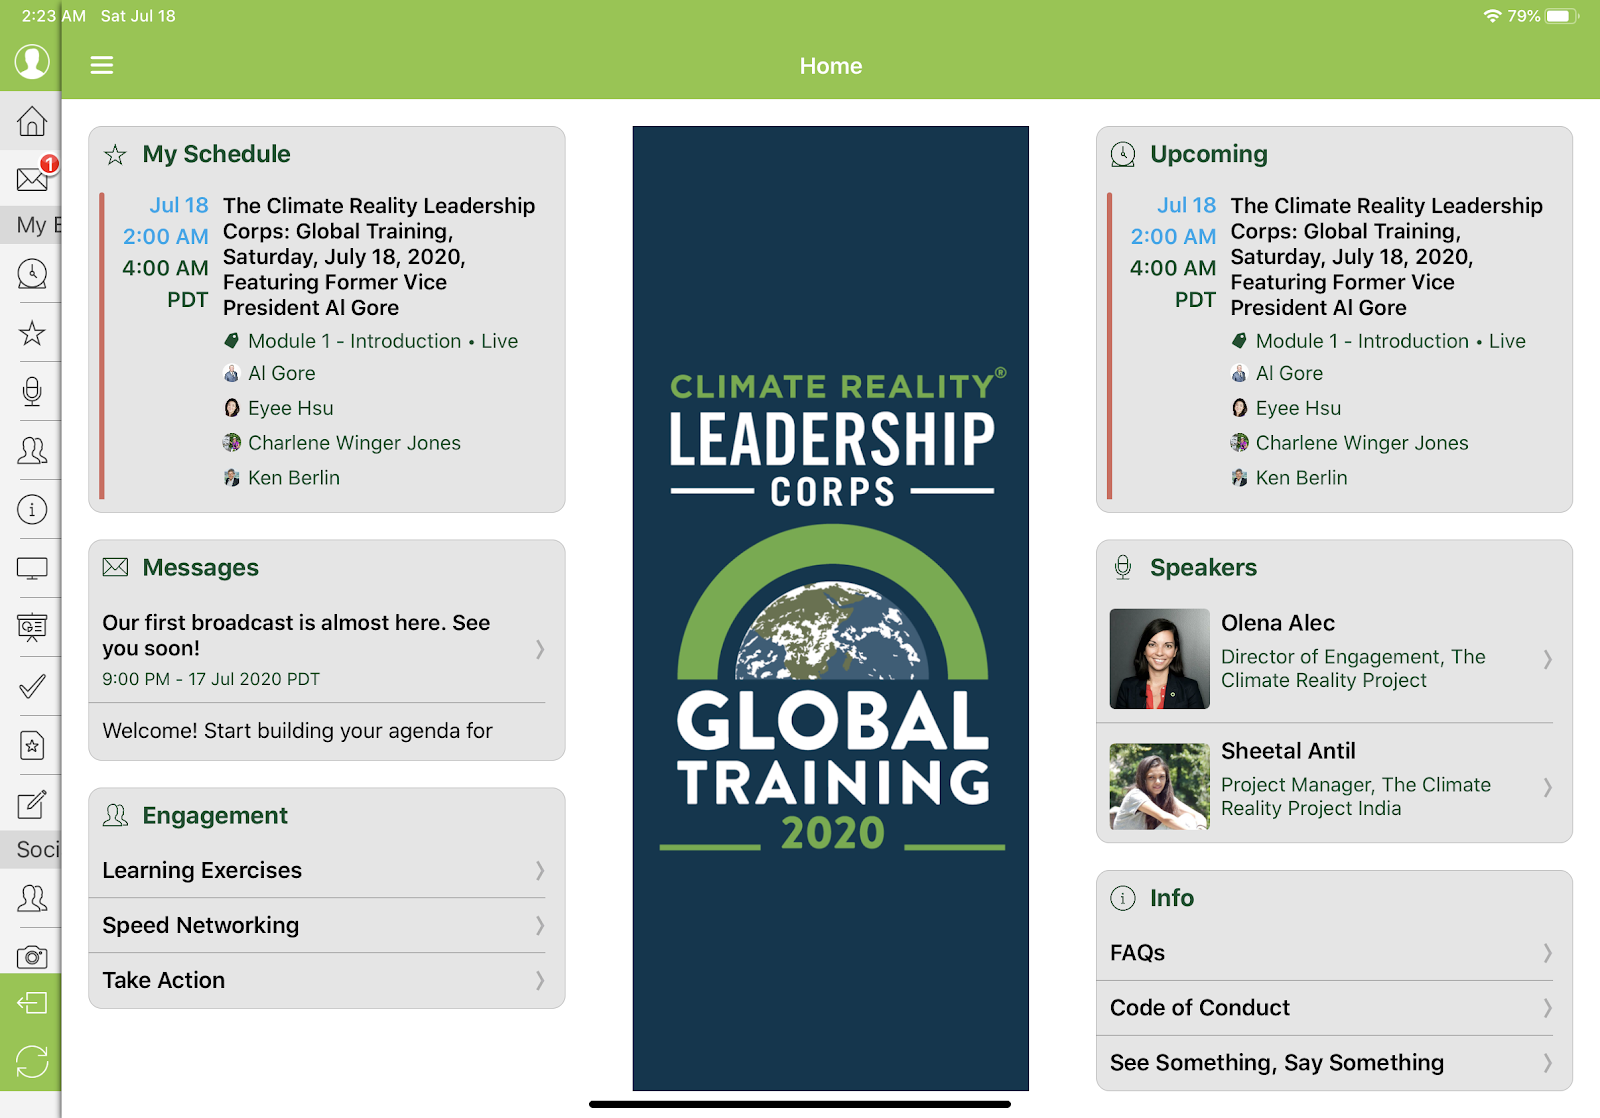 Image of mobile device view of The Climate Reality Project attendee landing page.